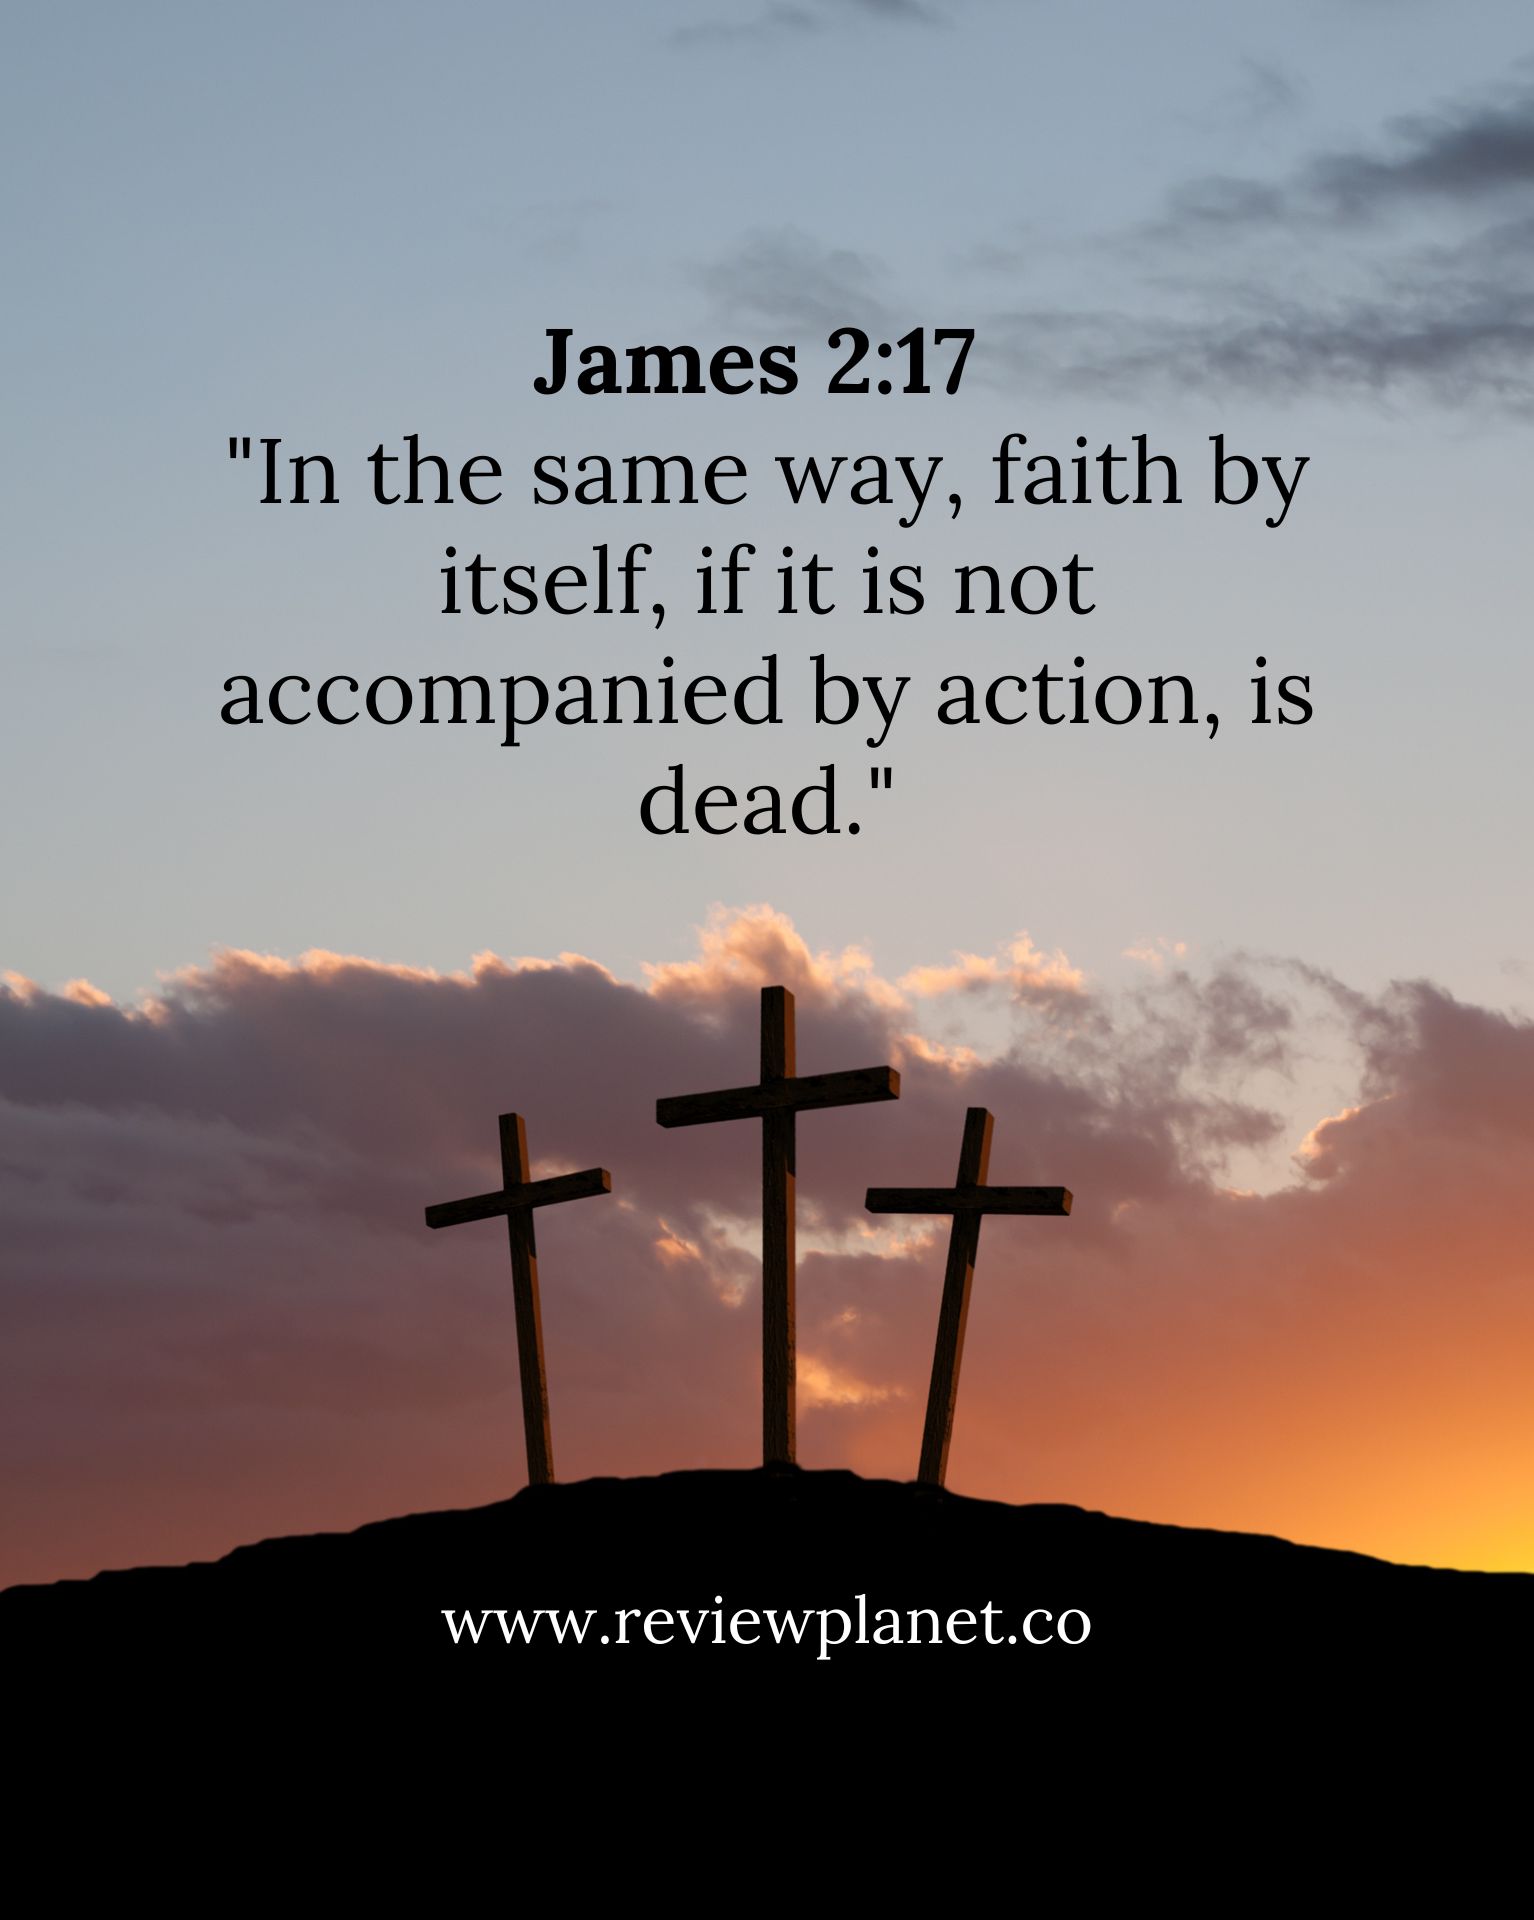 James 217  In the same way, faith by itself, if it is not accompanied by action, is dead.